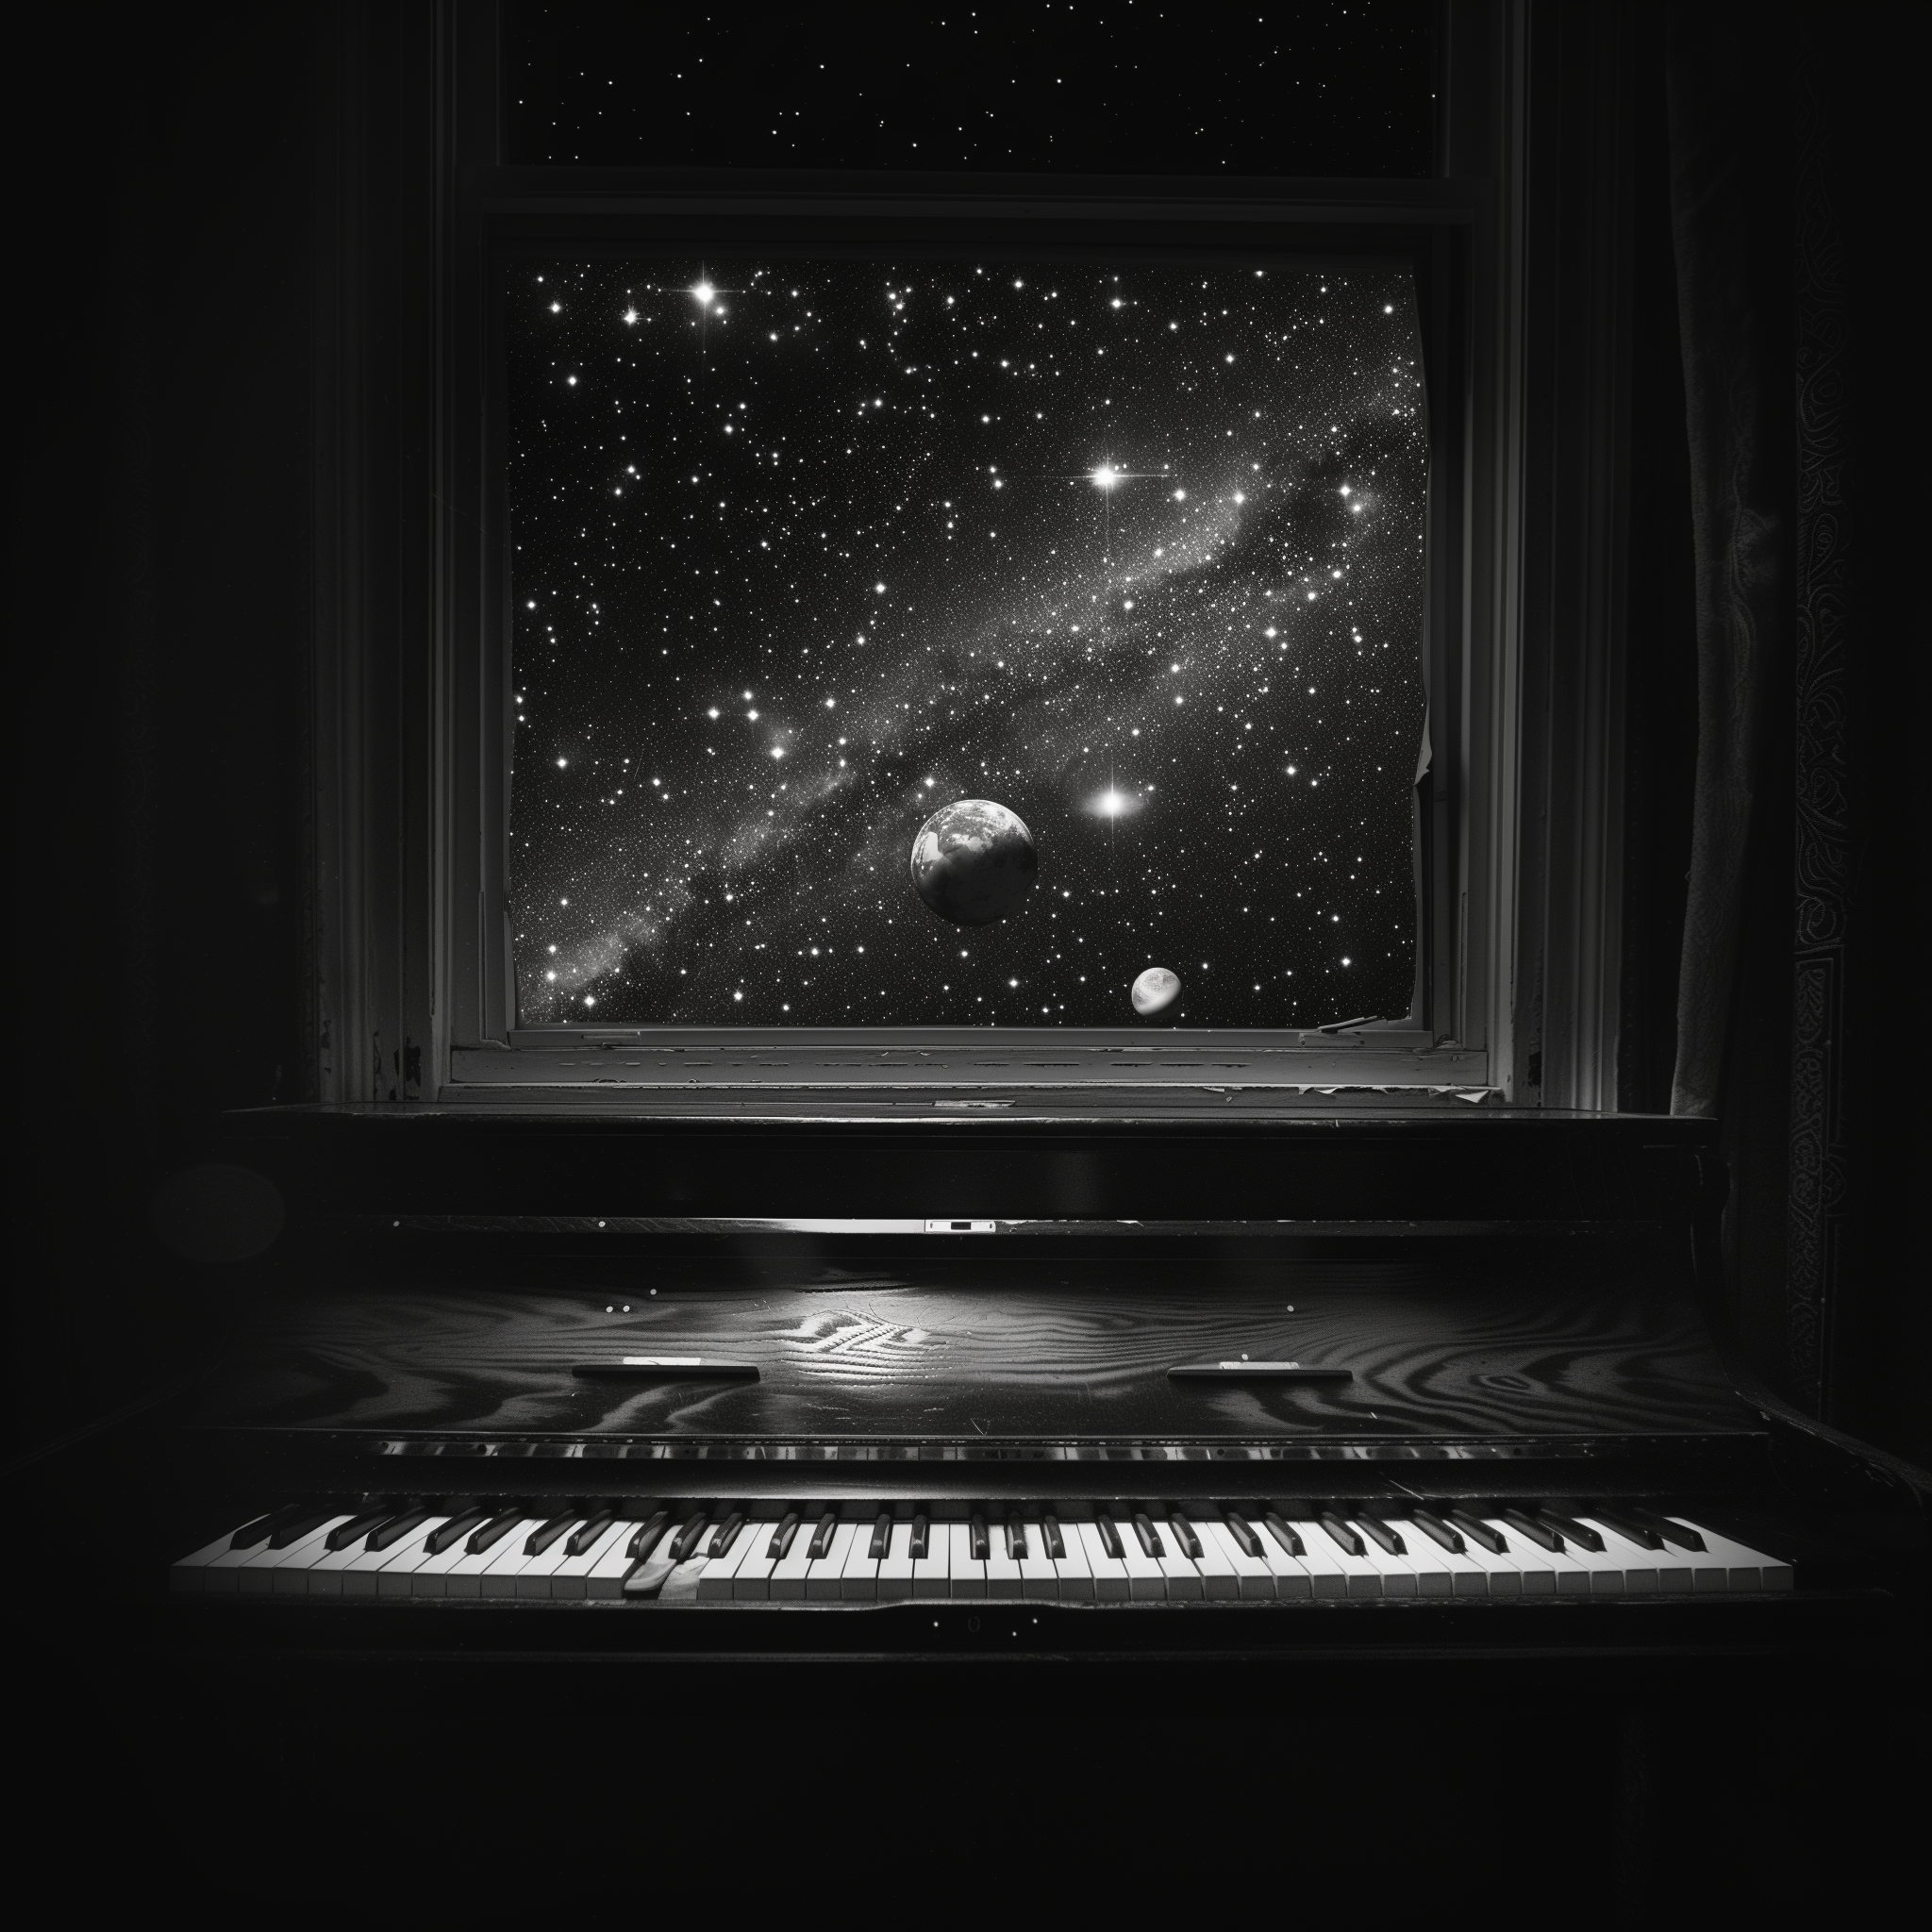 front view on a piano, some keys pressed down, but without a piano player. Above the piano is a window. Outside the wIndow is a straight alignment of planets in the universe. black and white.